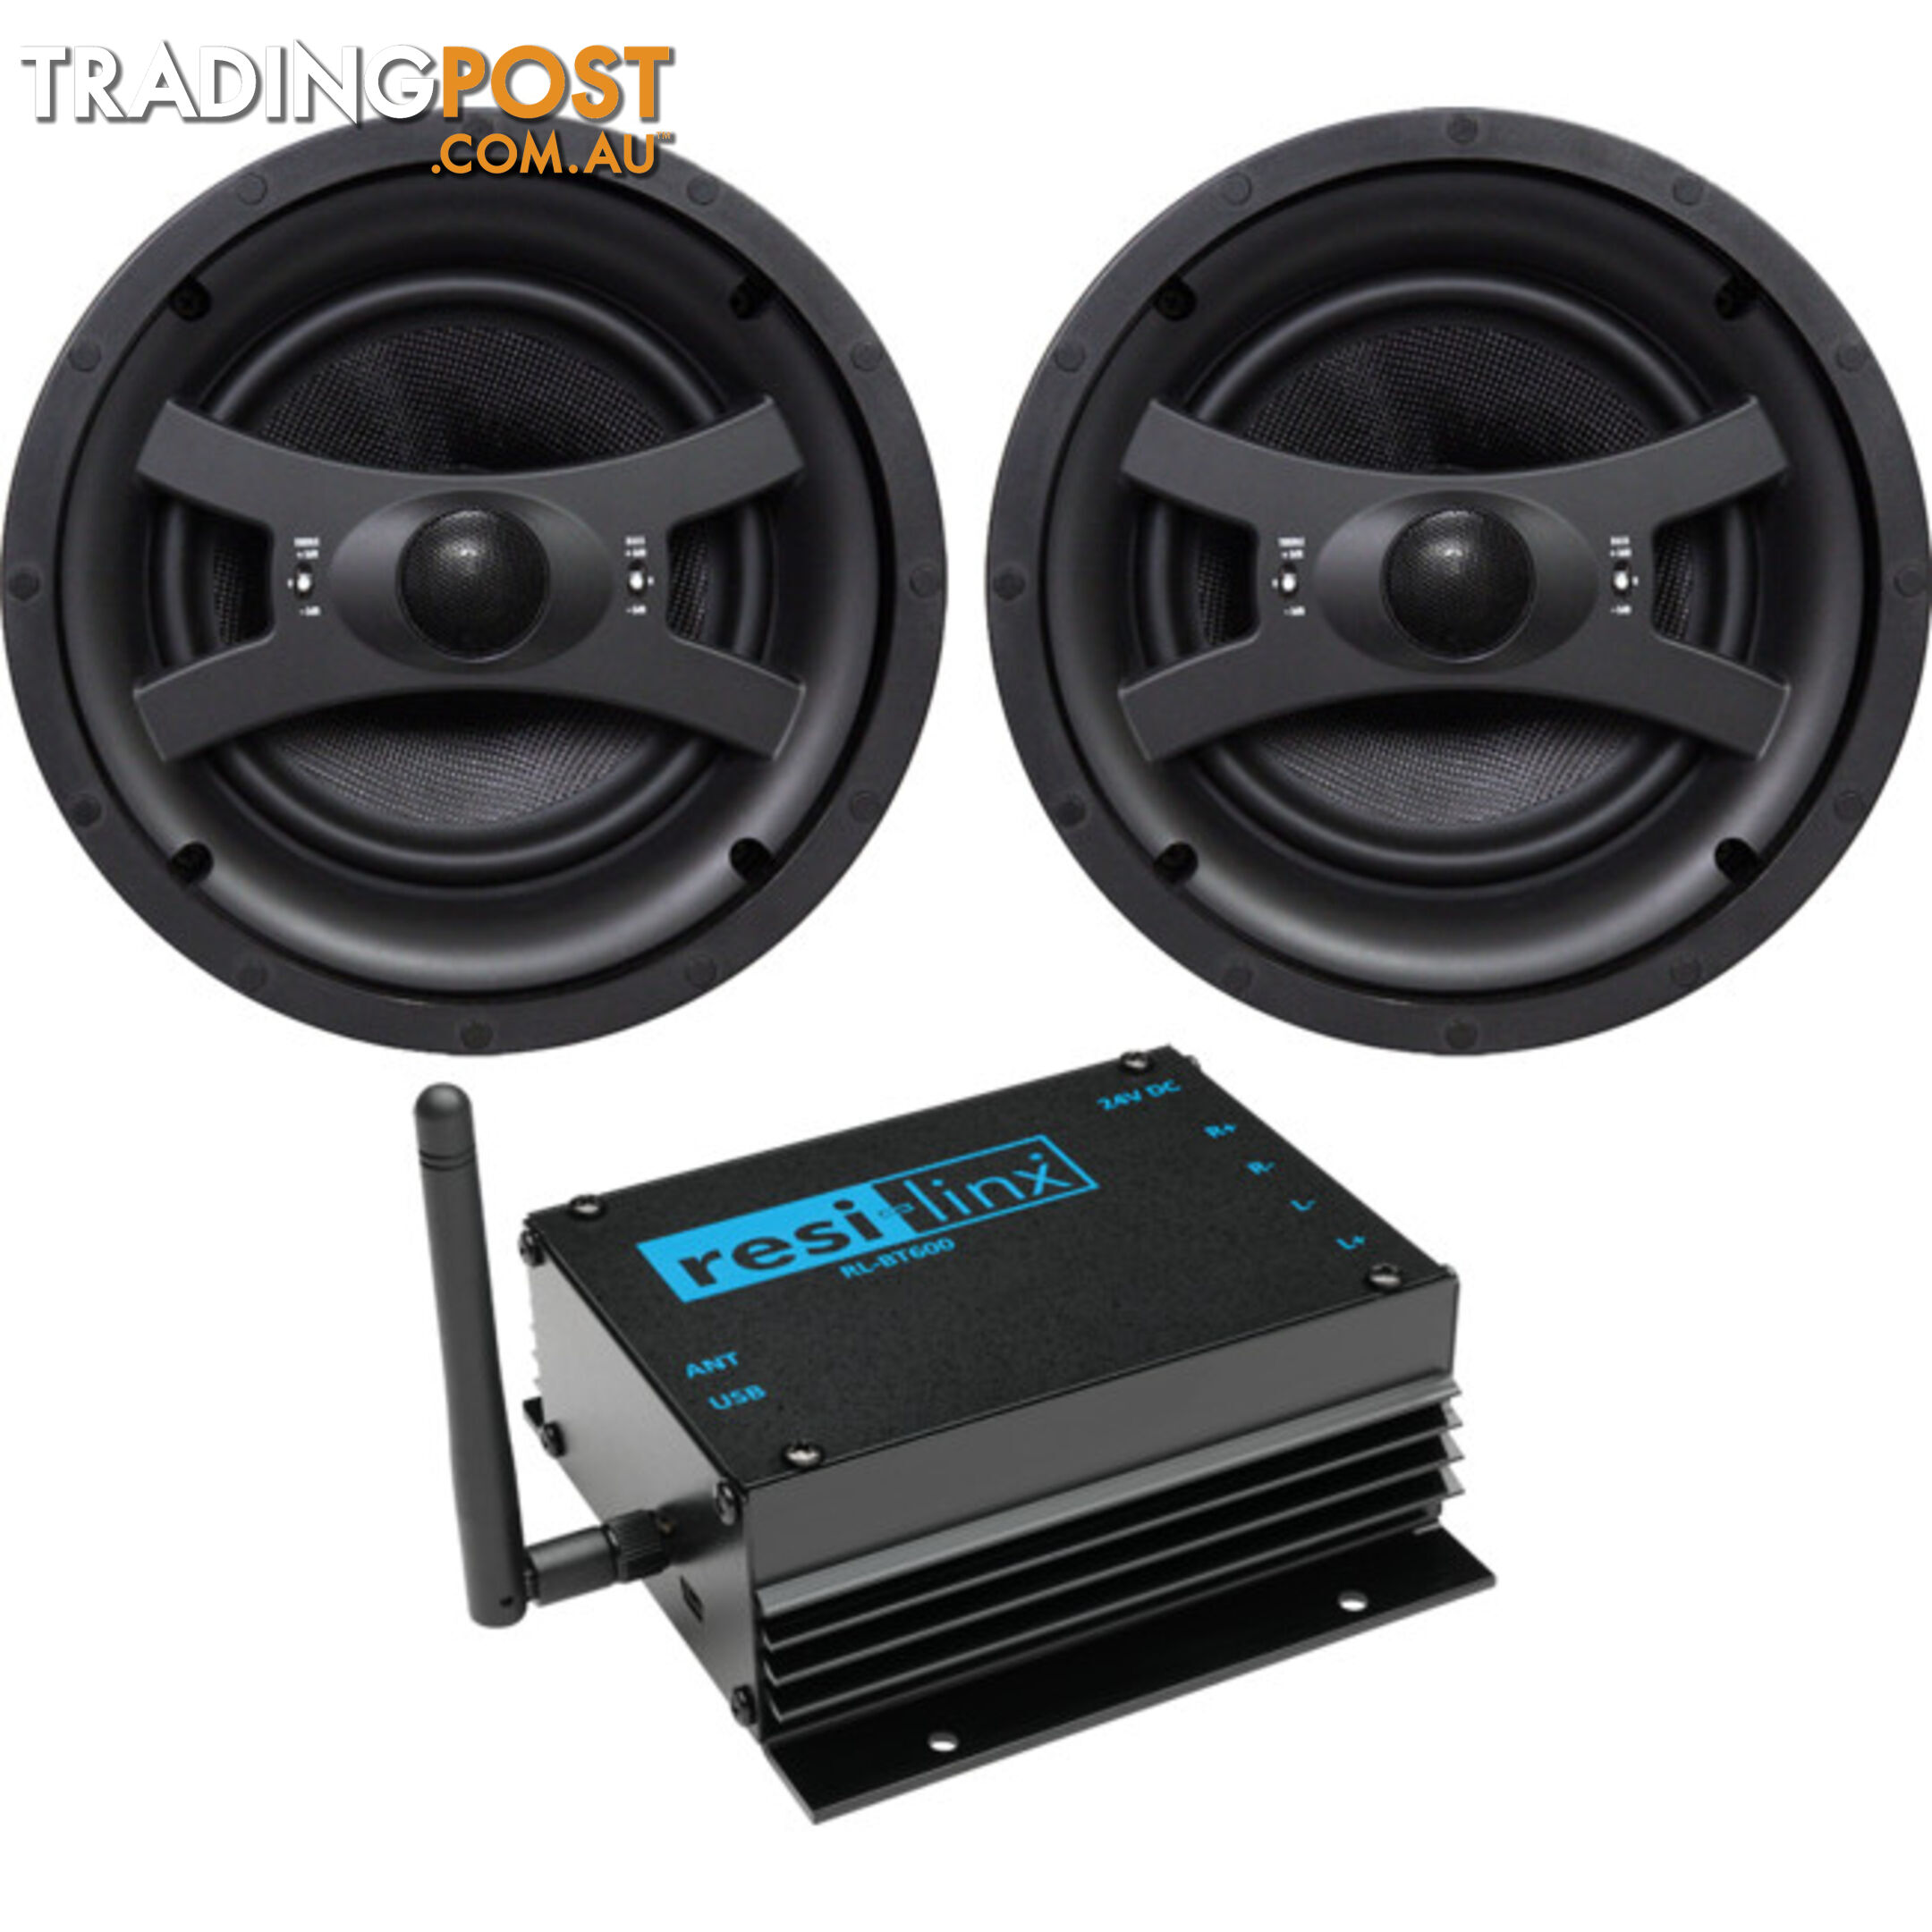 RLBT800 8" ACTIVE CEILING SPEAKERS 50W PER CH WITH BLUETOOTH